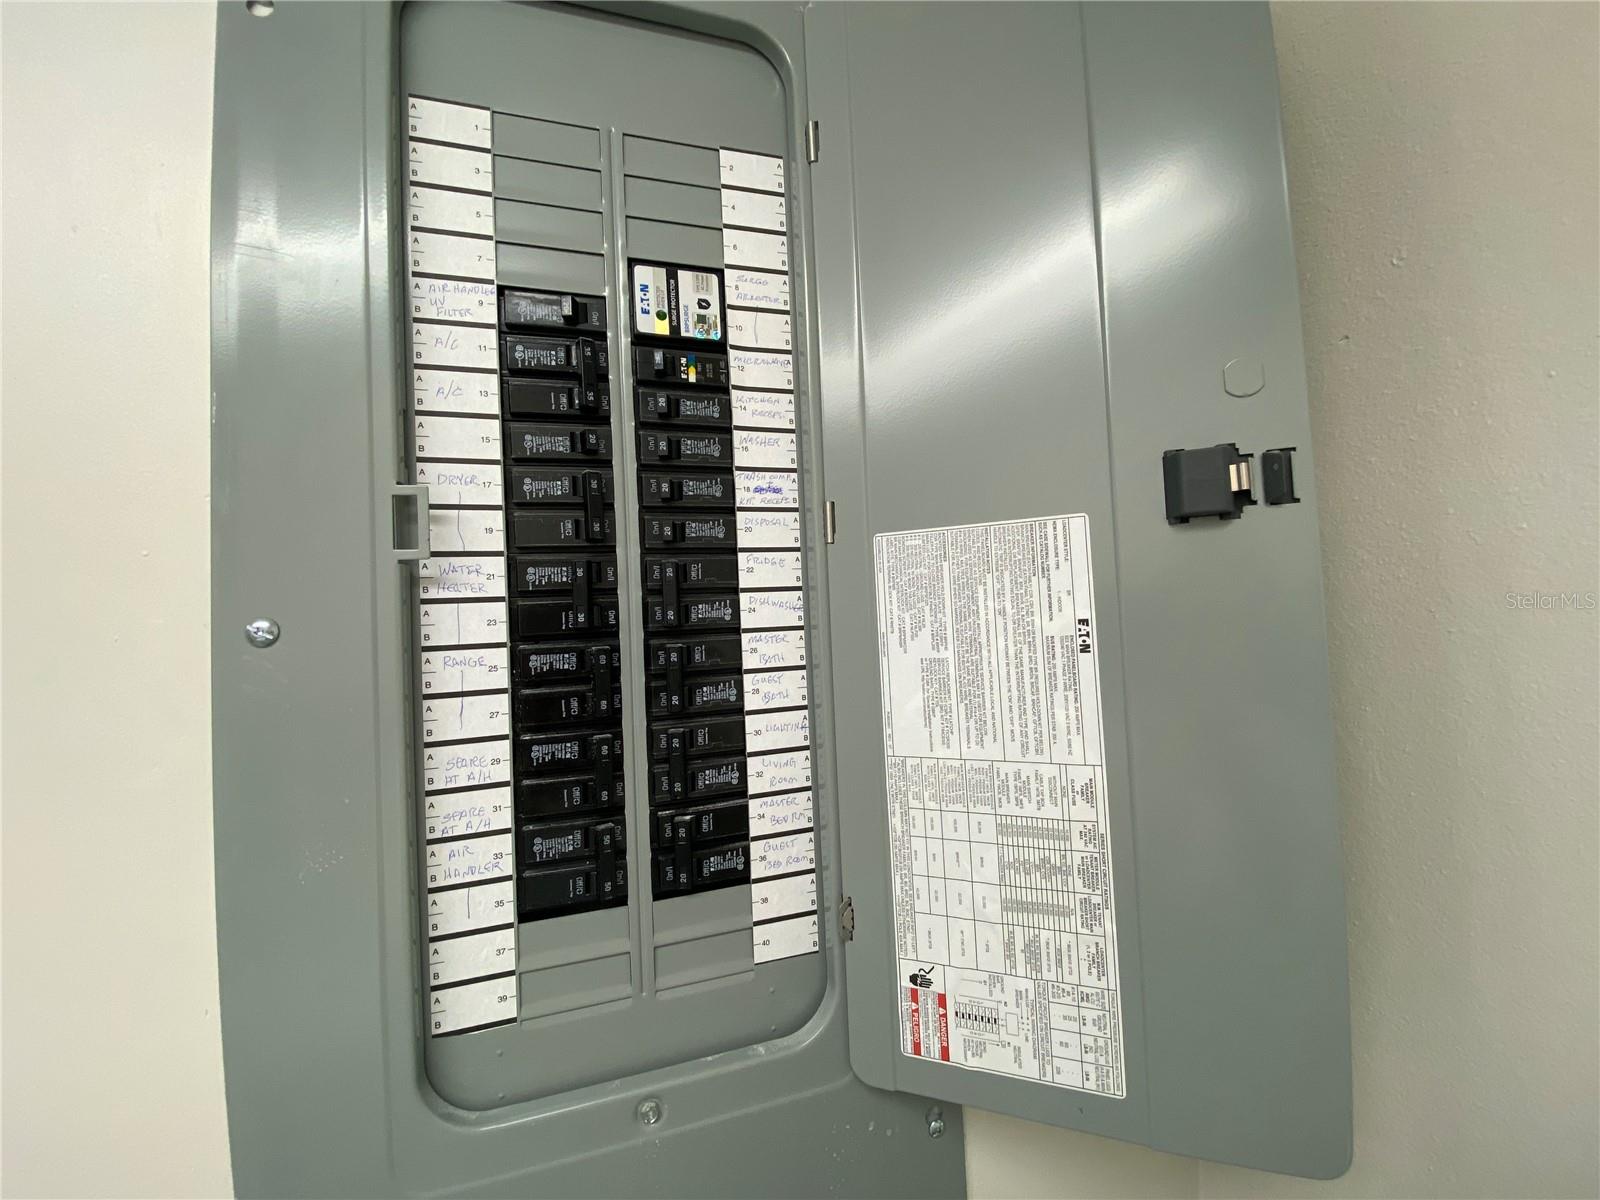 Updated Electrical panel with surge protector